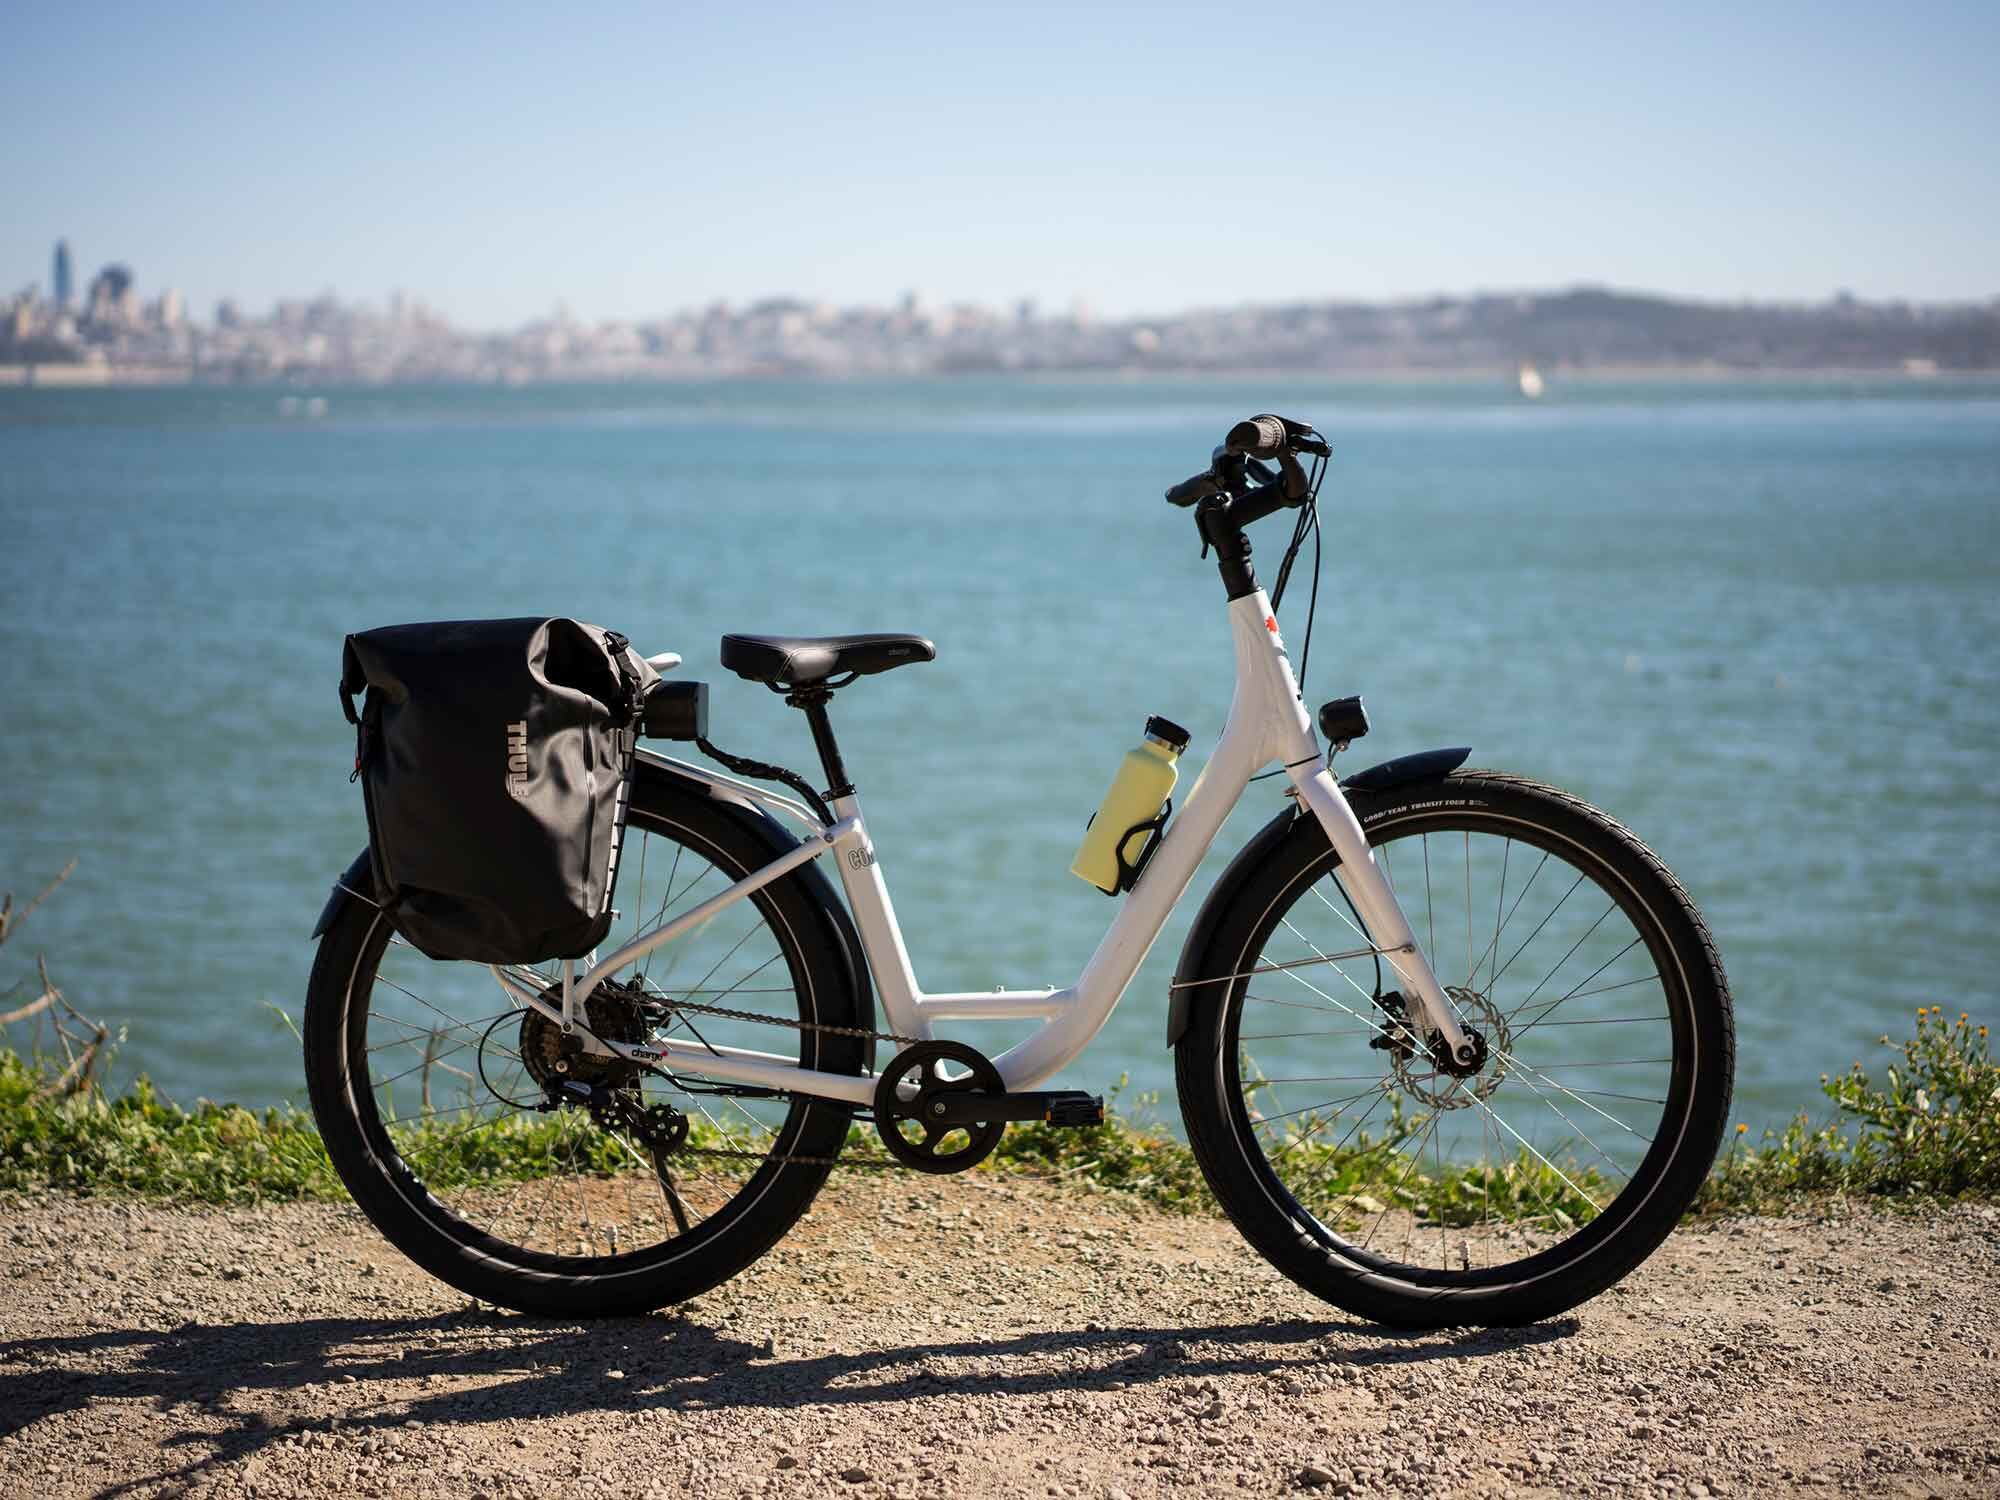 The Charge Comfort 2 e-bike is a smooth ride that fits in tight